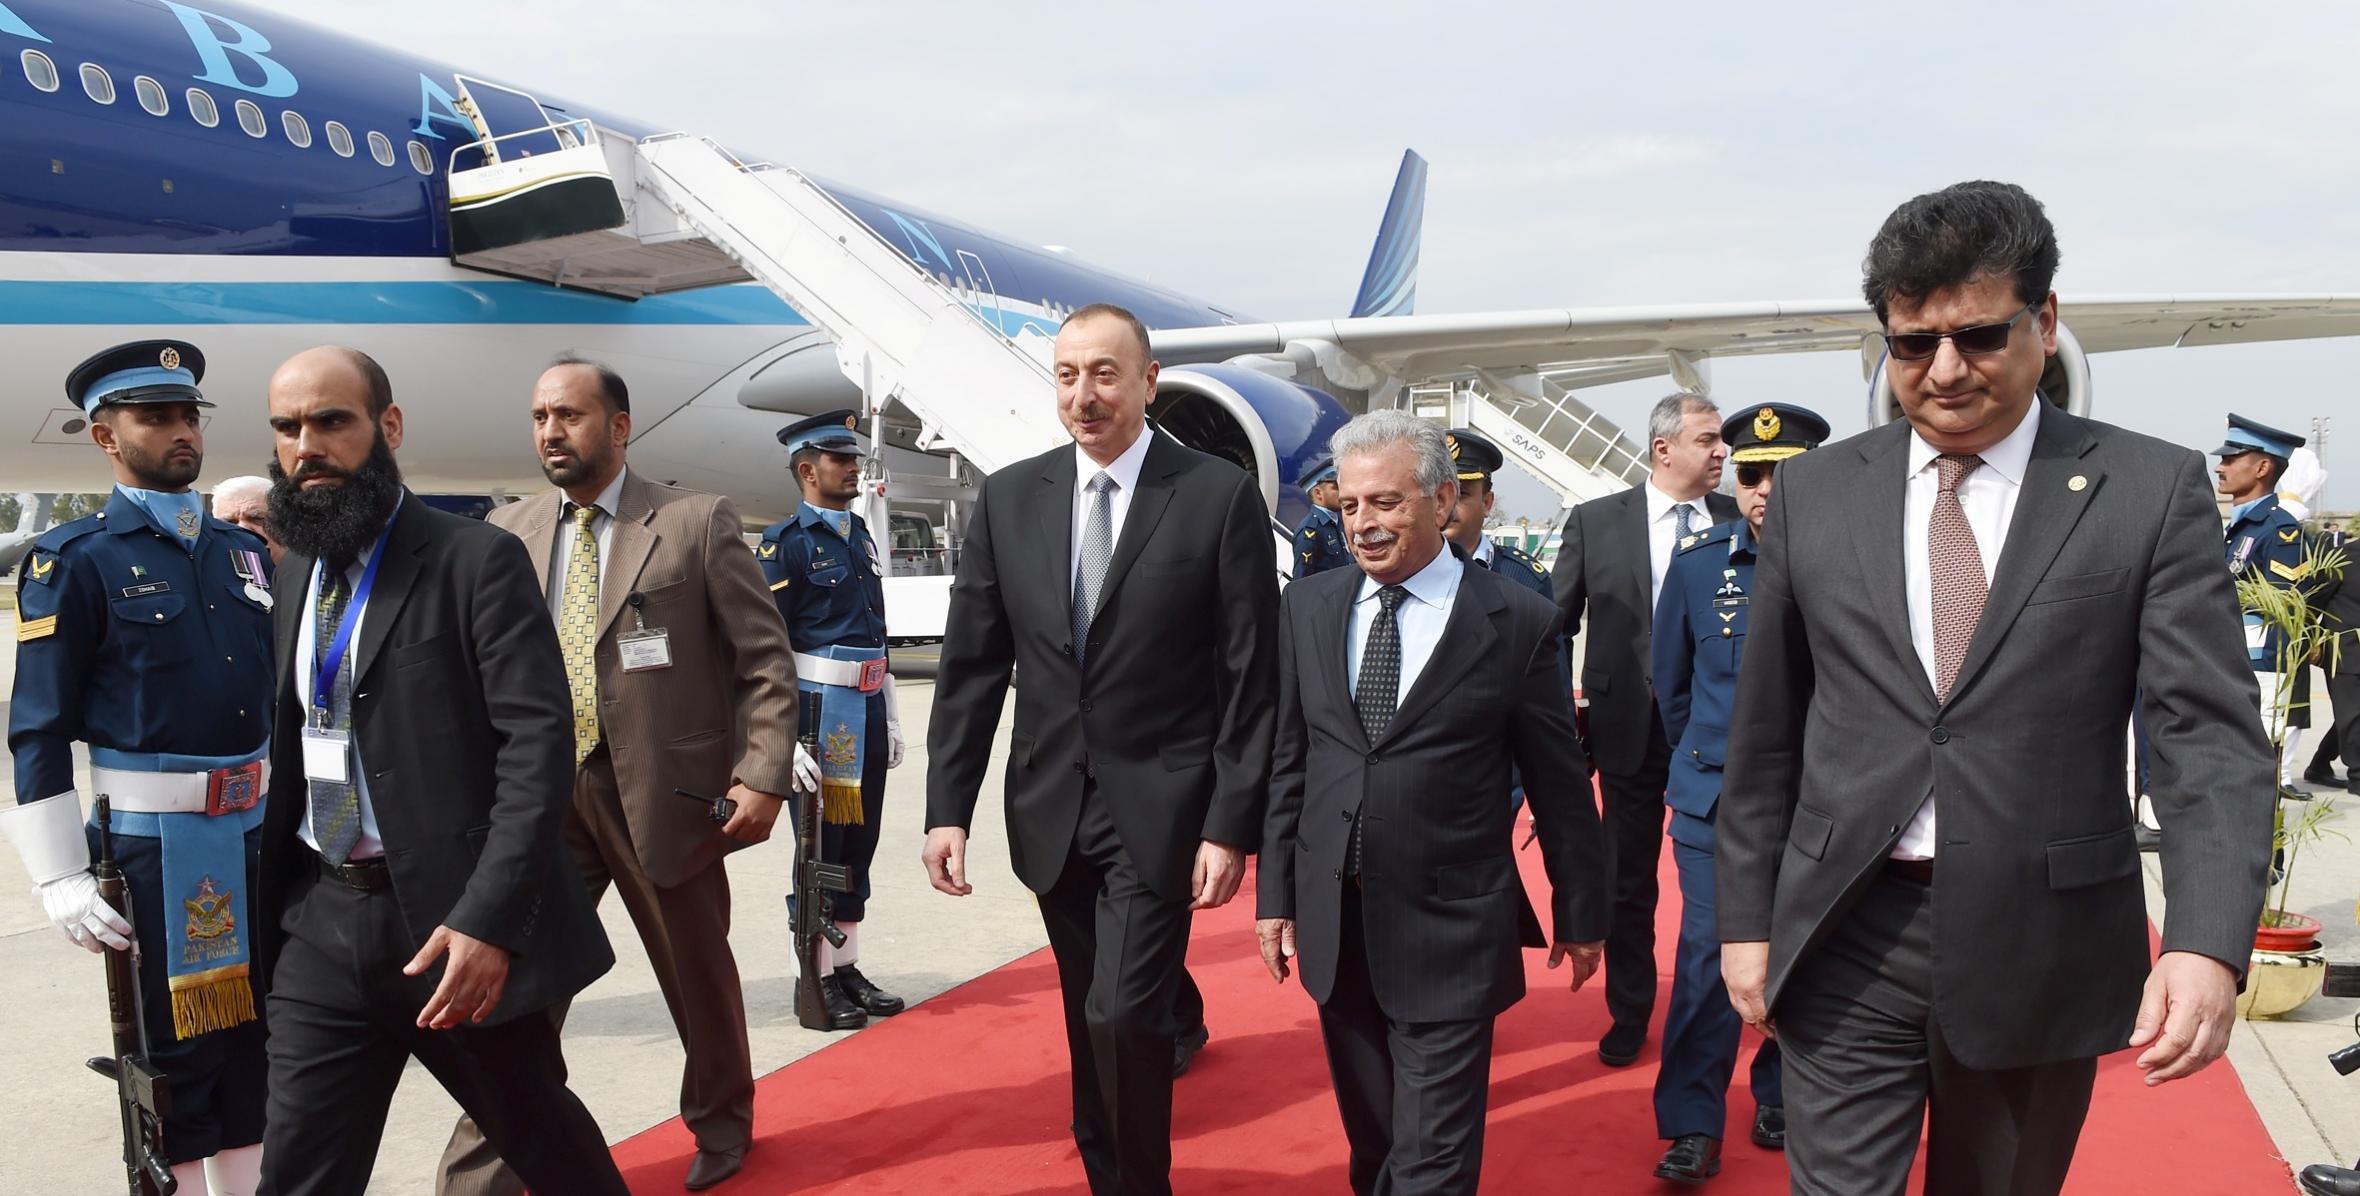 Ilham Aliyev arrived in Pakistan for a visit